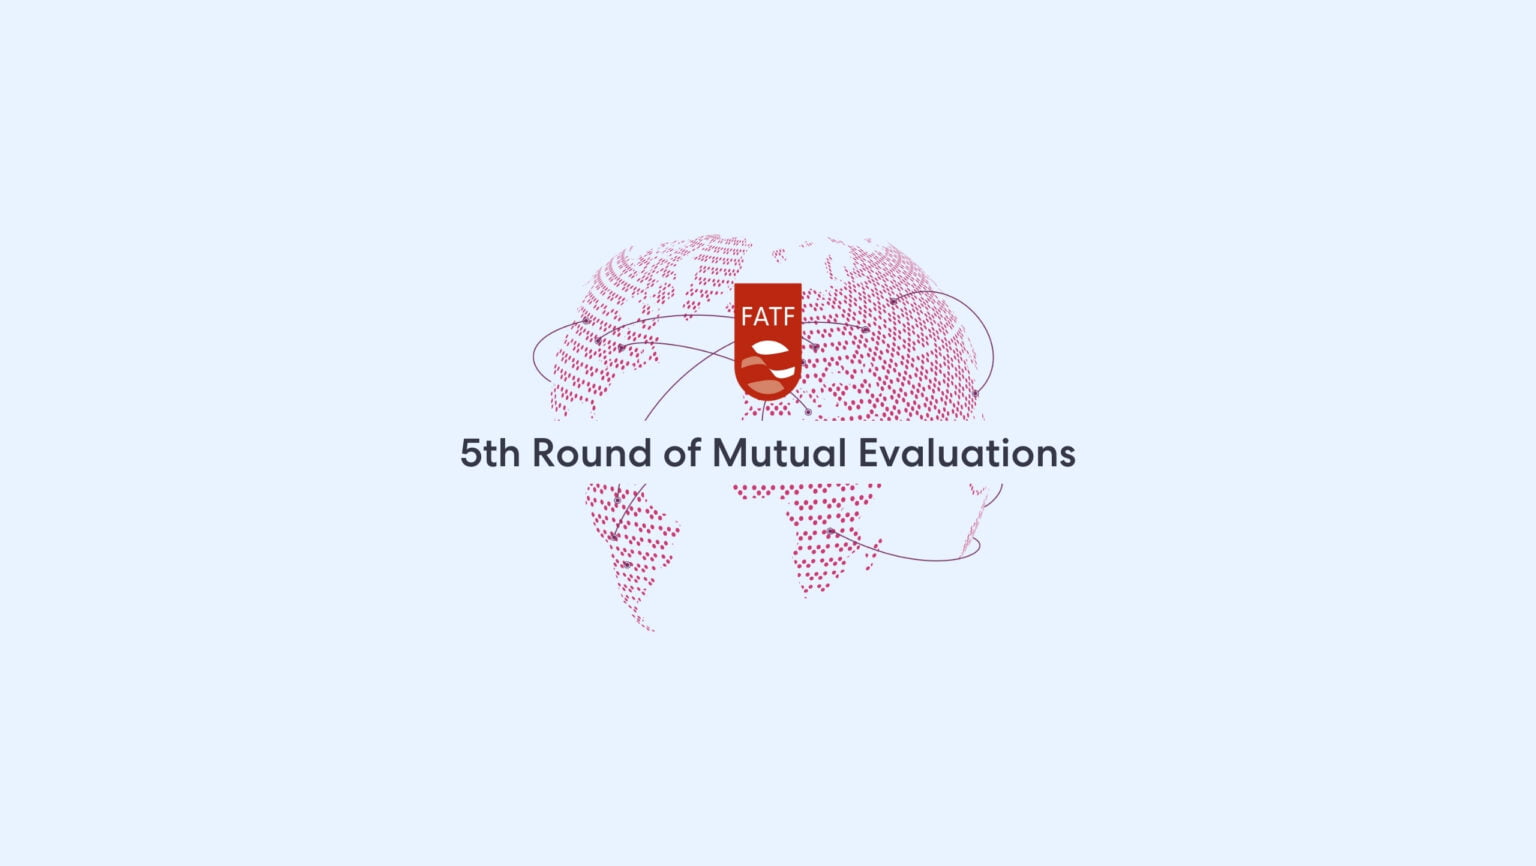 The 5th Round of FATF Mutual Evaluations will determine how well the FATF recommendations have been implemented.